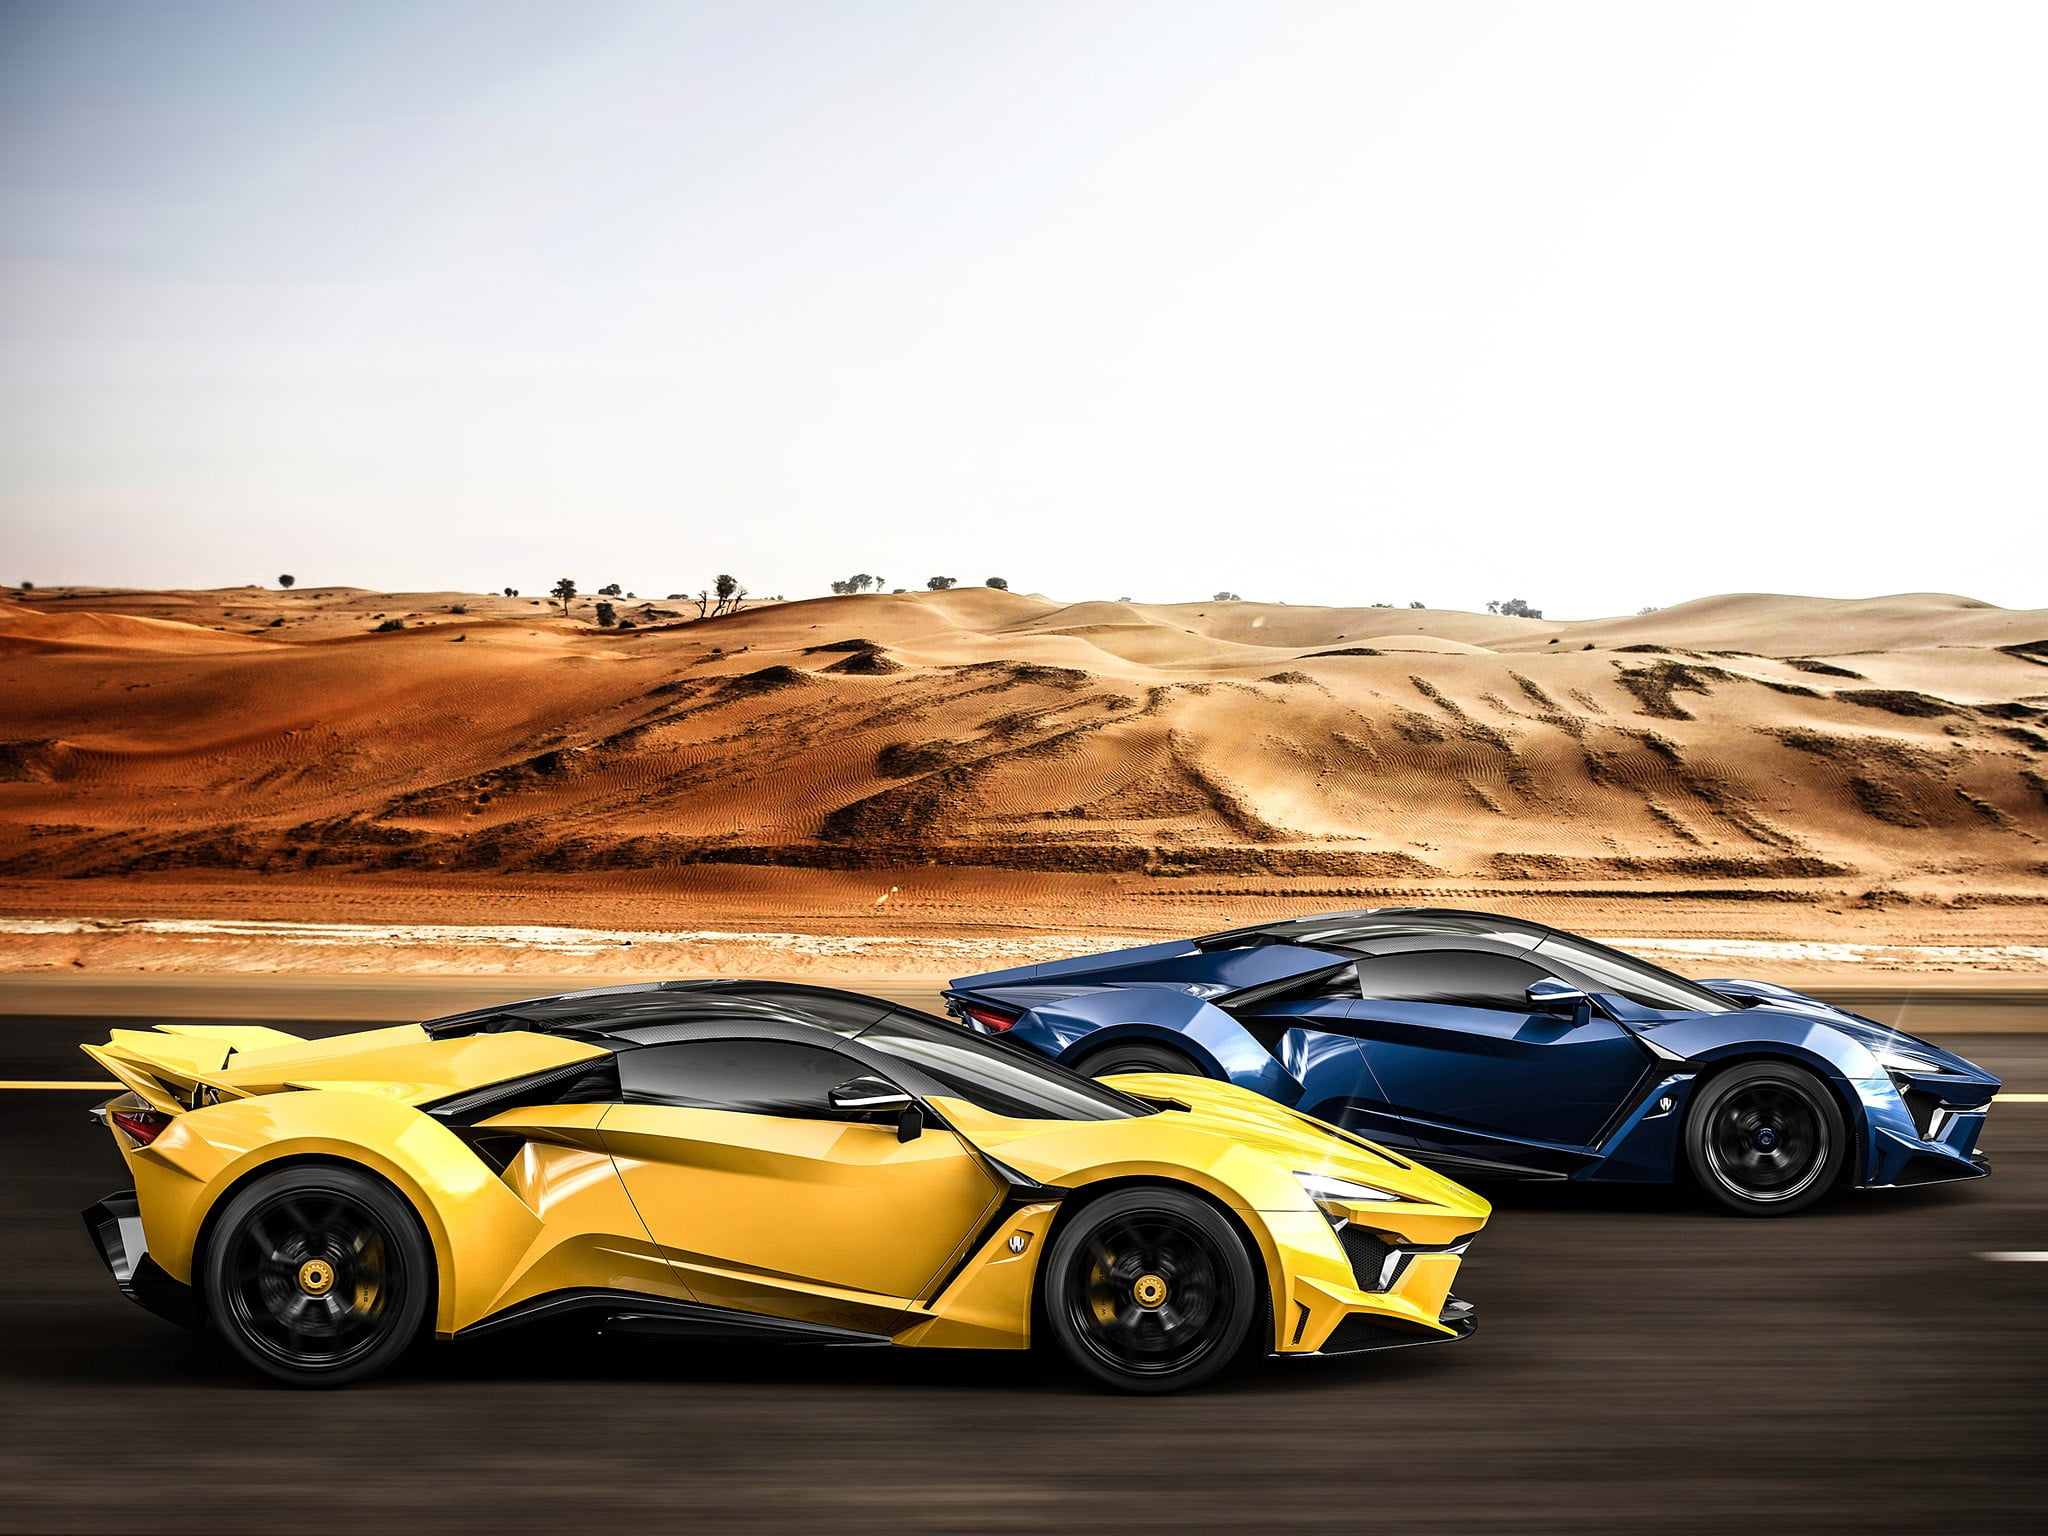 poster of yellow and blue sports car, W Motors Fenyr, road, desert